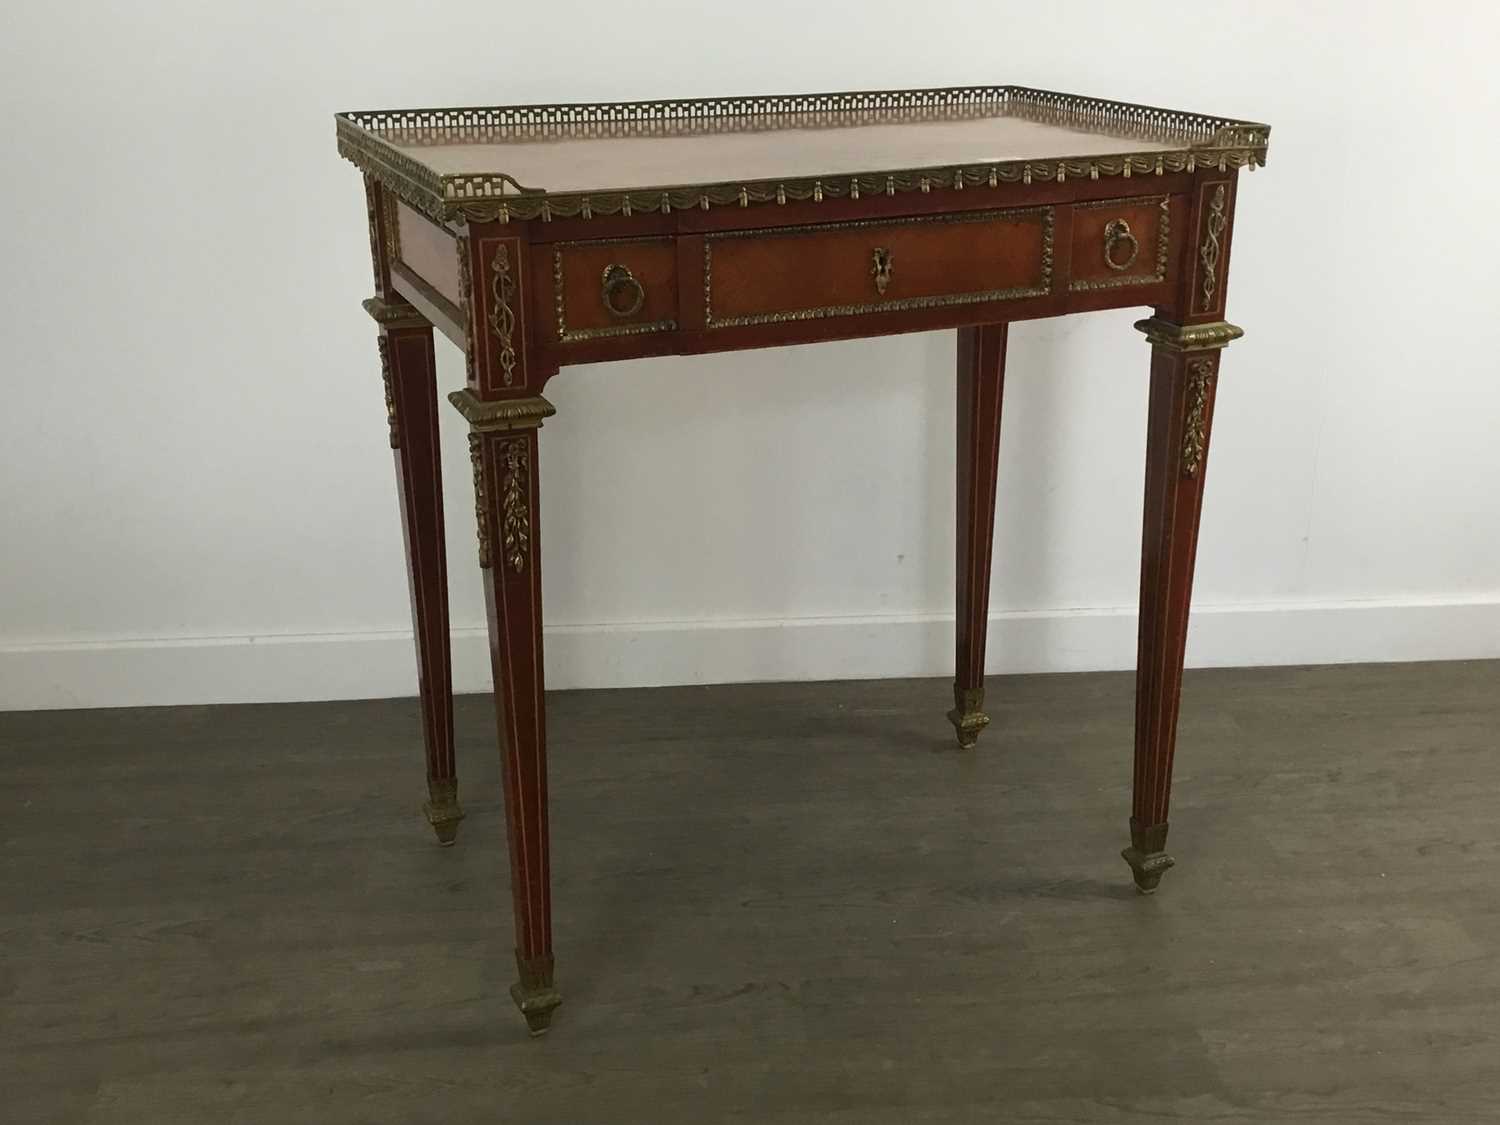 Lot 909 - FRENCH BRASS MOUNTED MAHOGANY AND KINGWOOD WRITING TABLE OF LOUIS XVI DESIGN